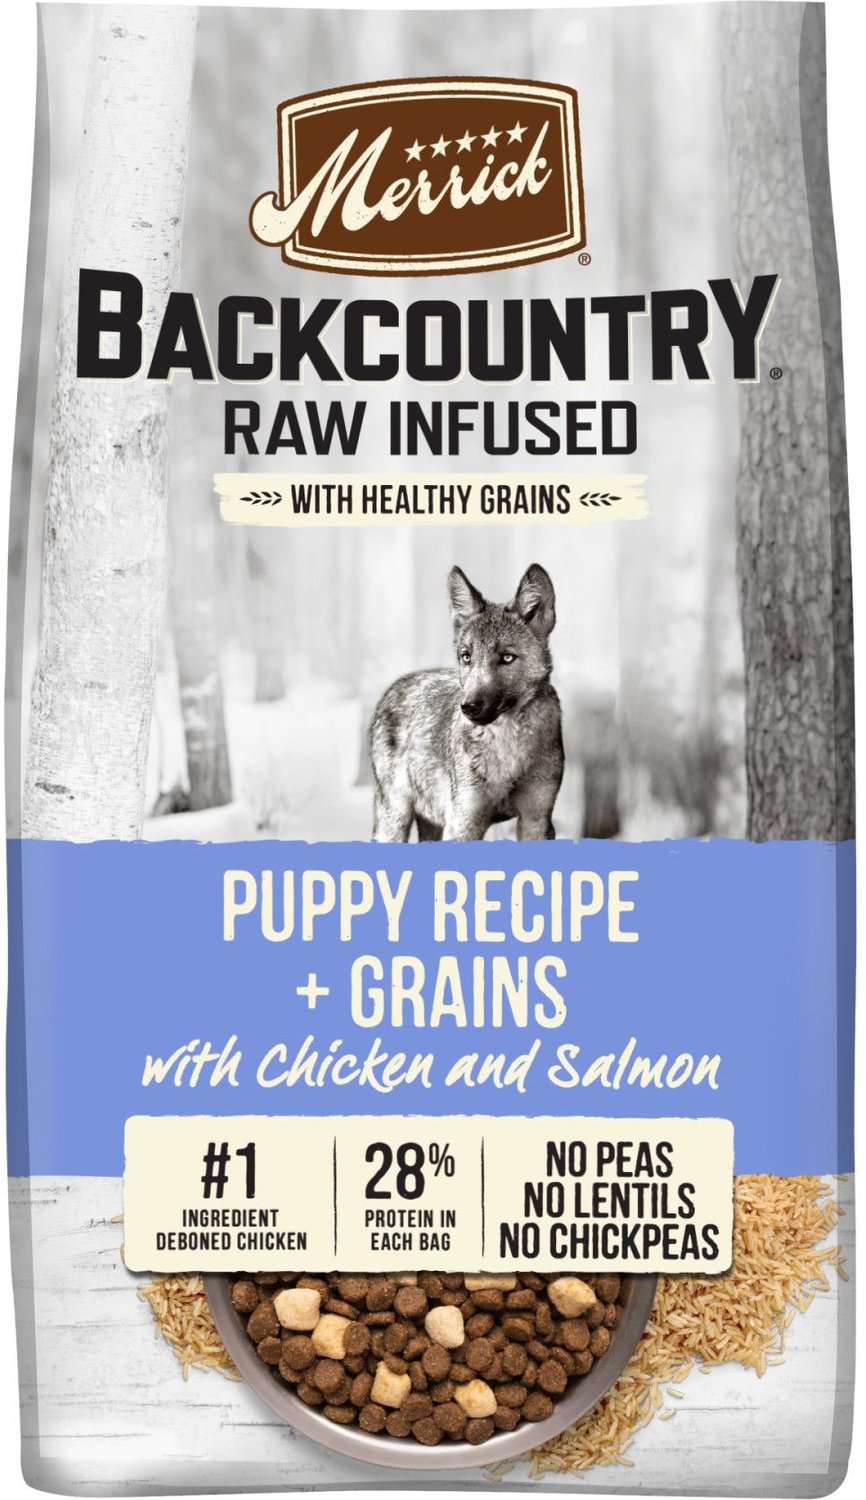 backcountry raw infused puppy